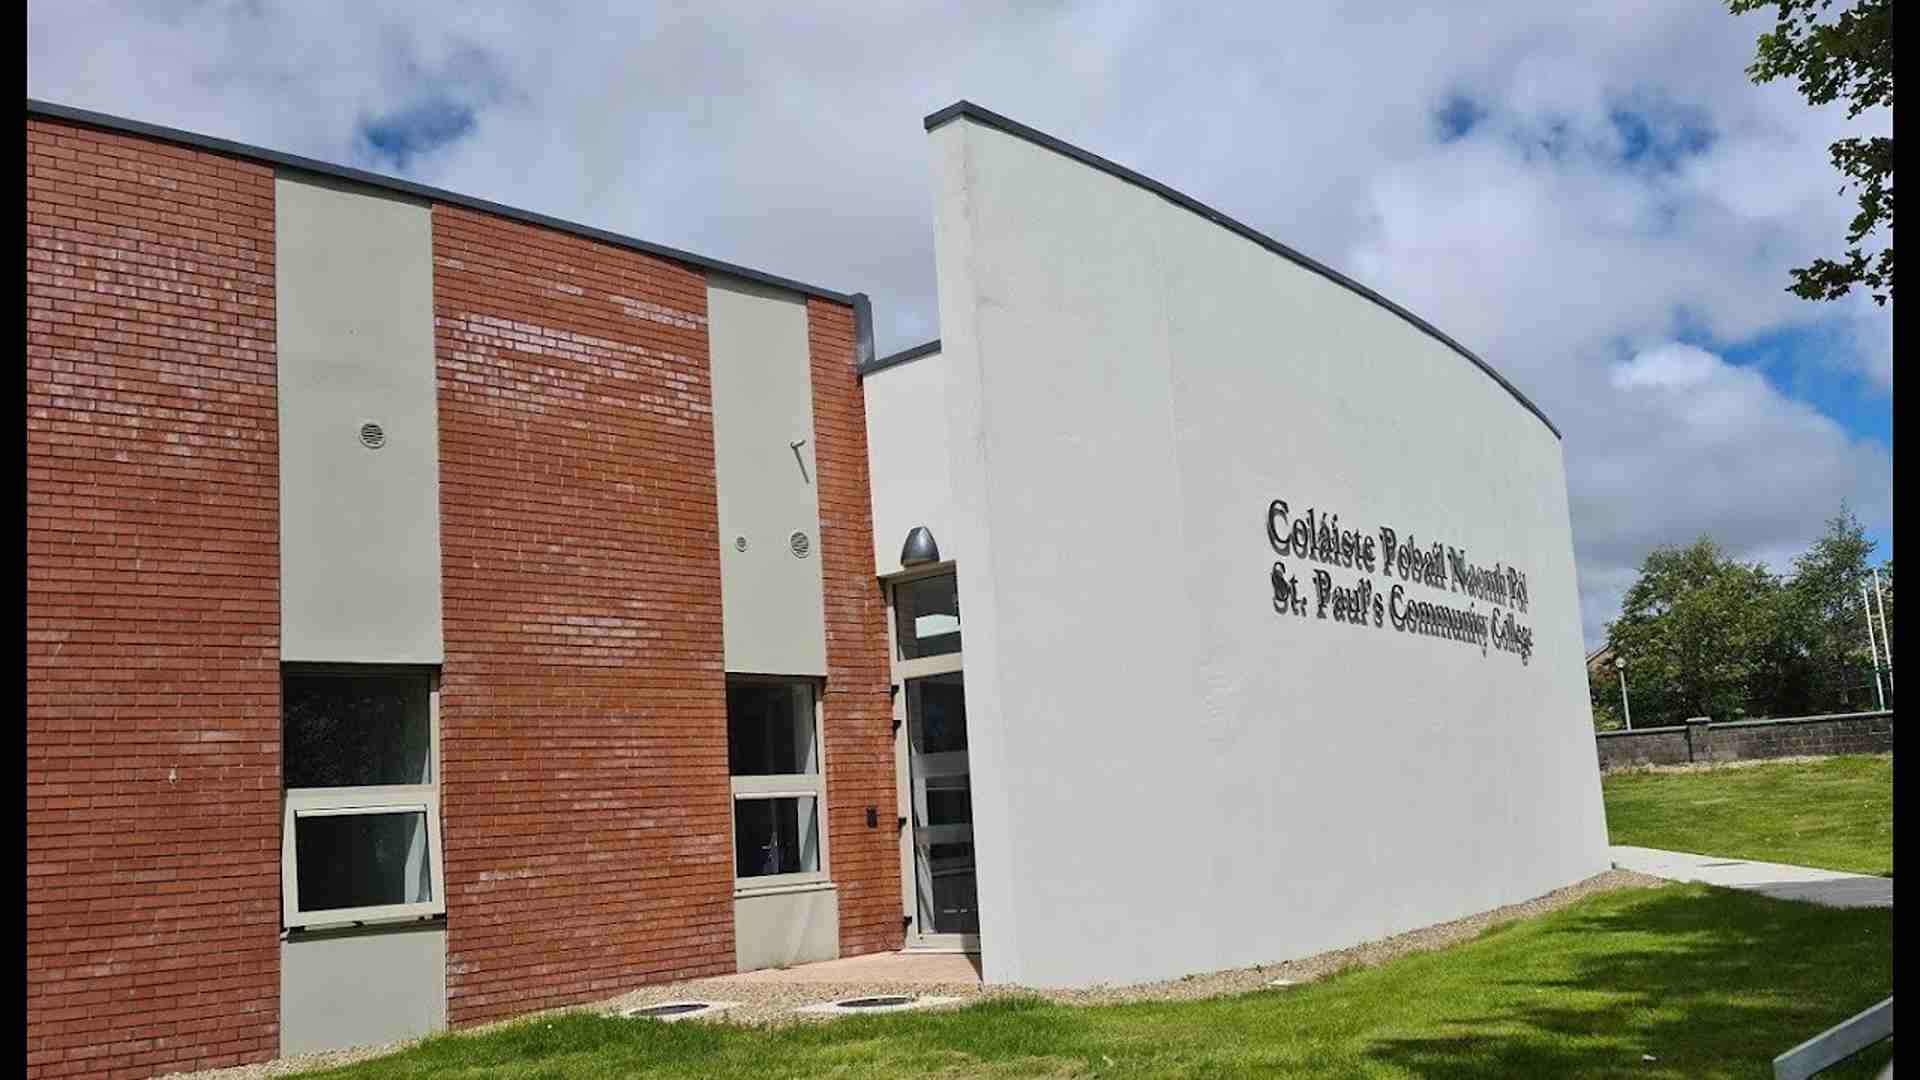 St Paul's Community College Waterford